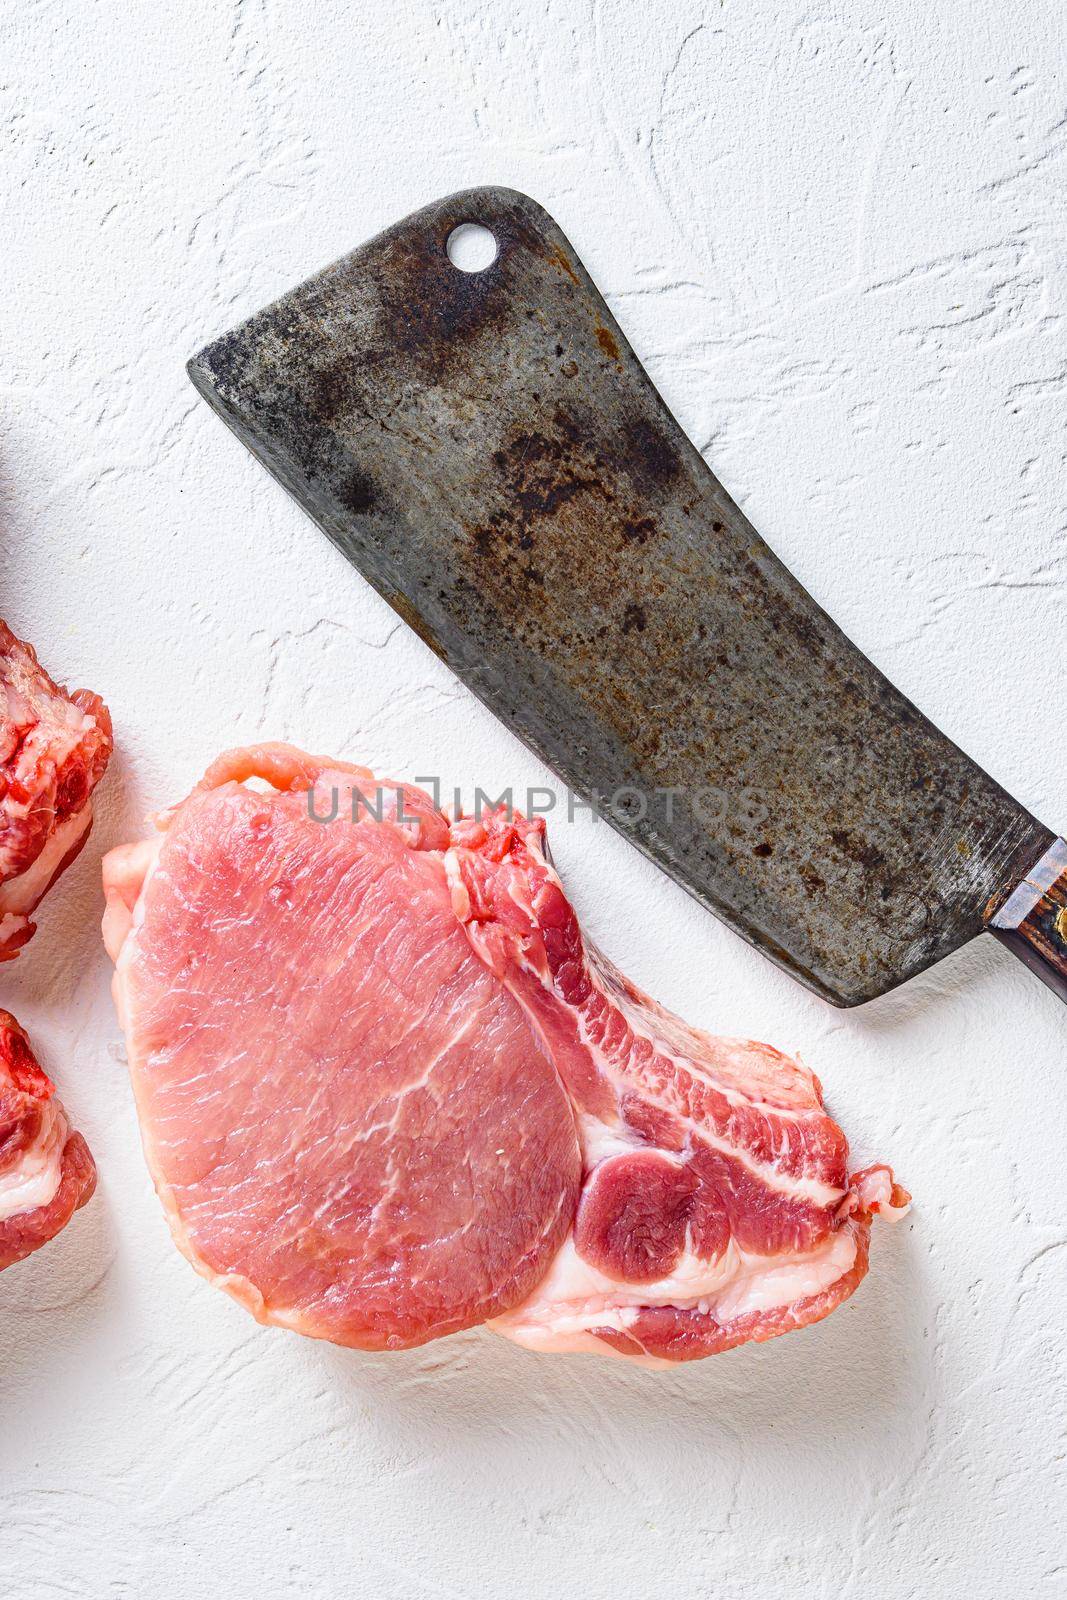 Organic bio Raw pork chops set for grilling, baking or frying, Fith butcher cleaver ower textured white background. top view.